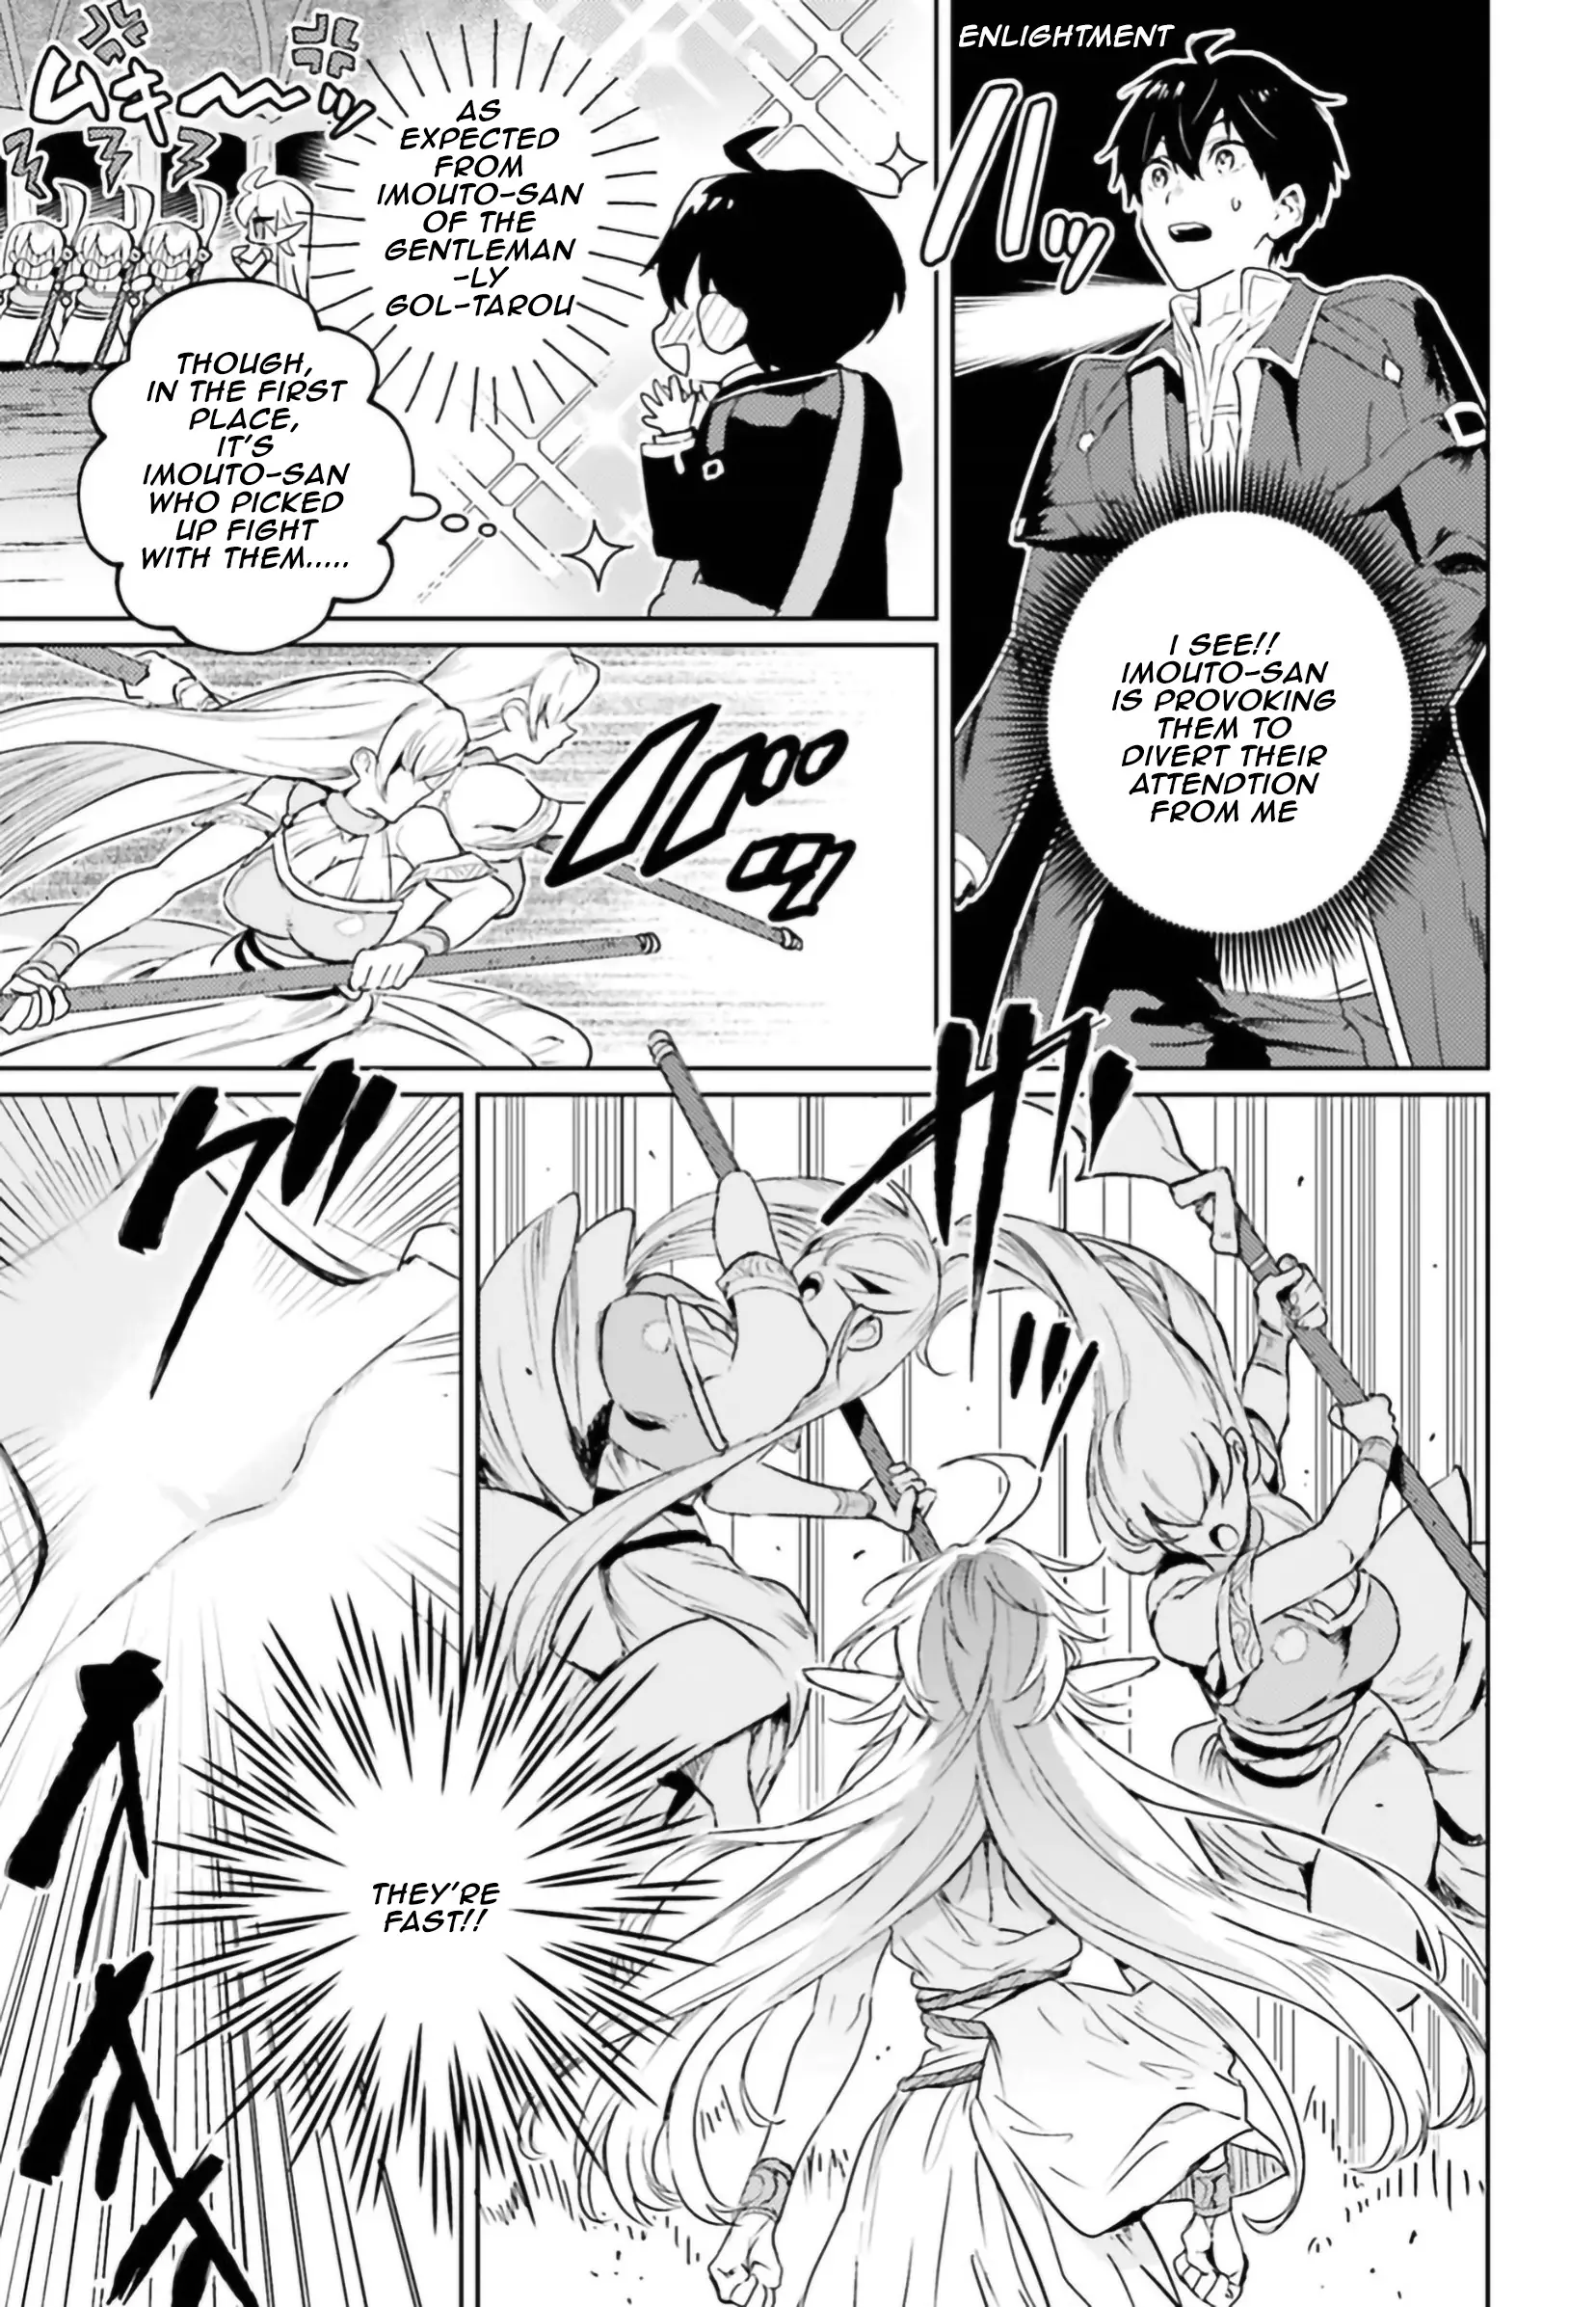 The Sorcerer King of Destruction and the Golem of the Barbarian Queen - 6 page 21